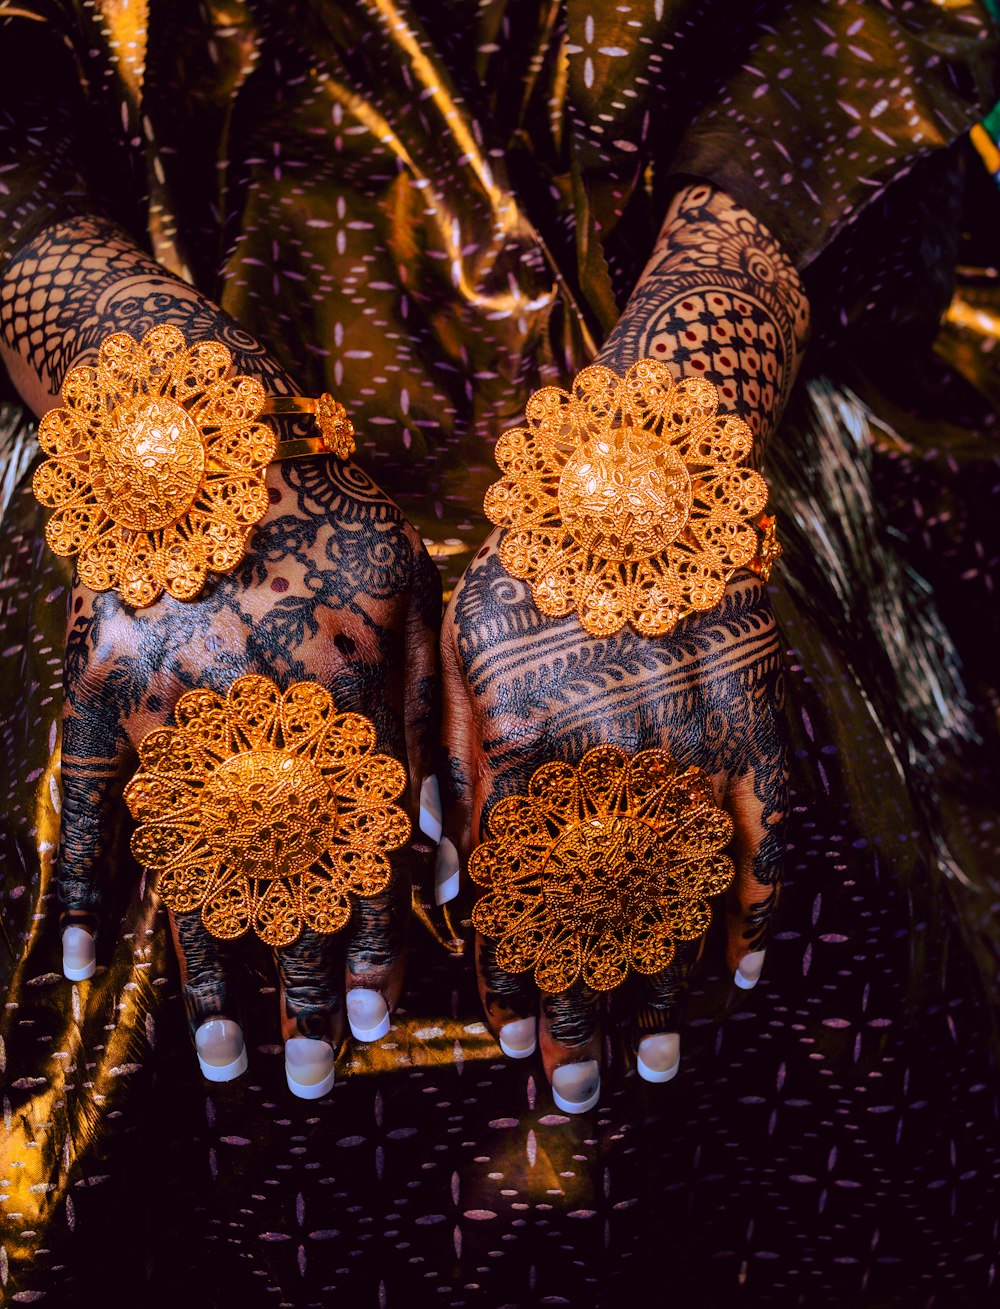 a pair of hands with intricate designs on them